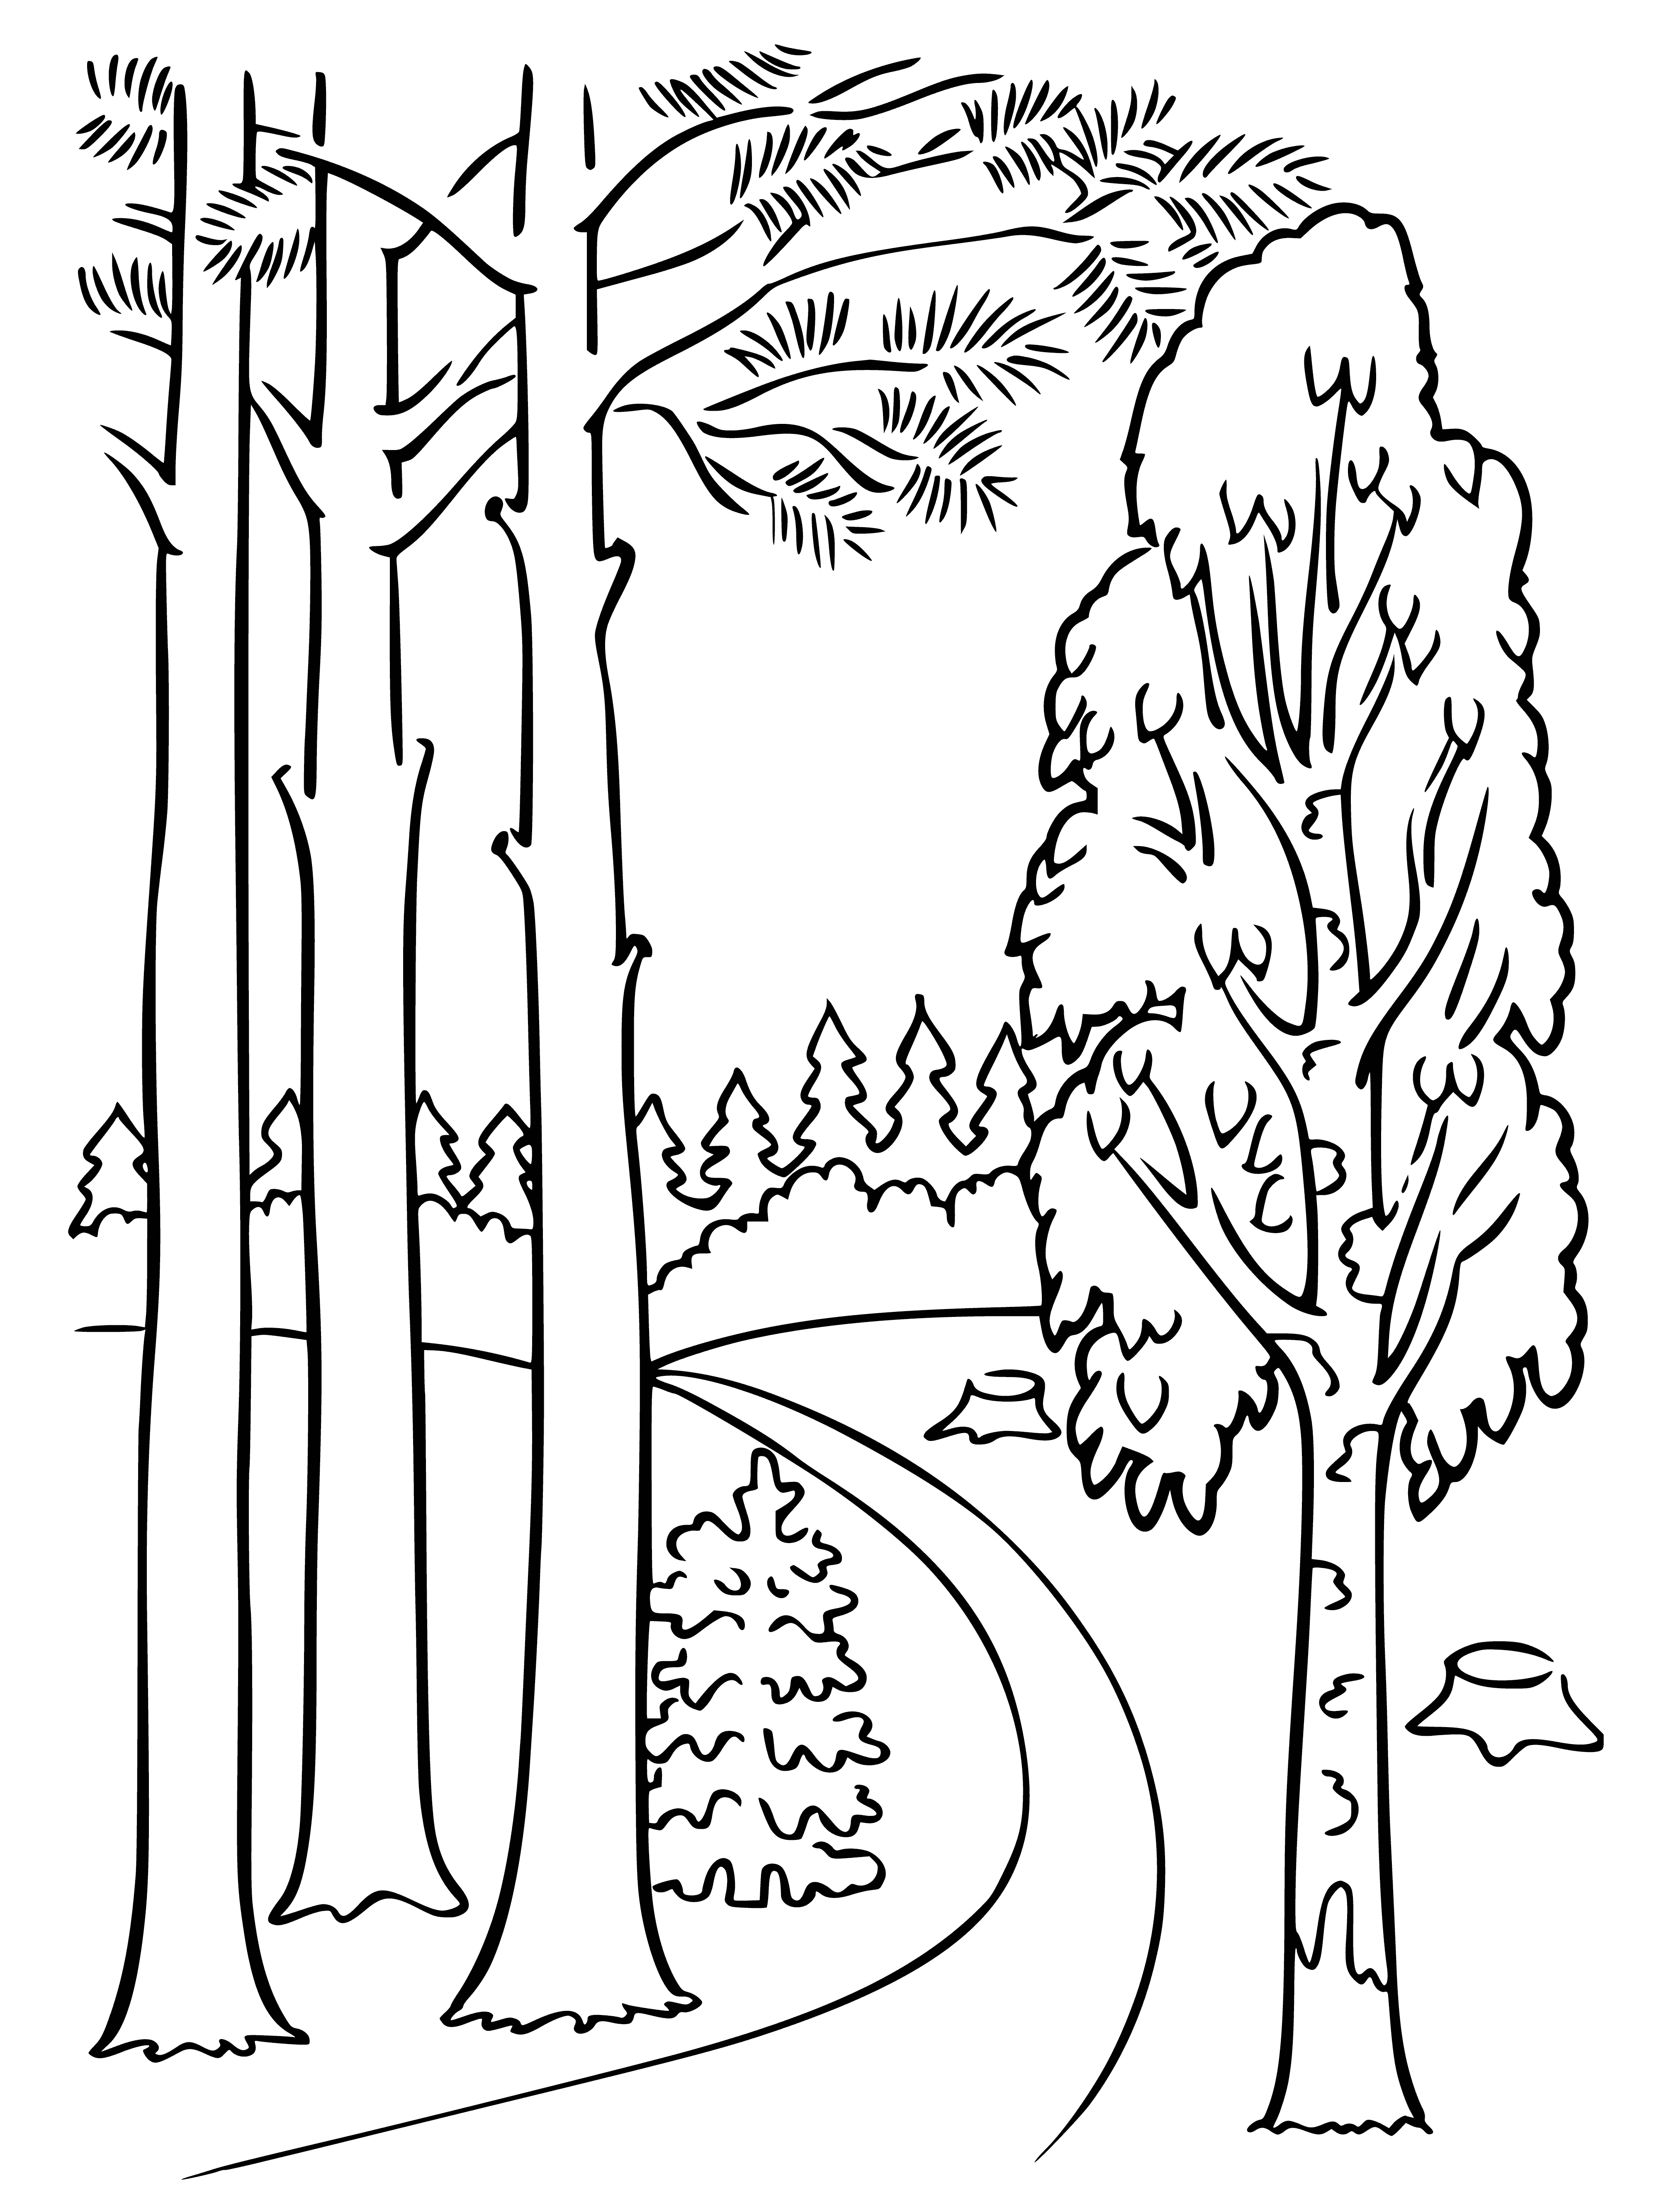 Path in the forest coloring page